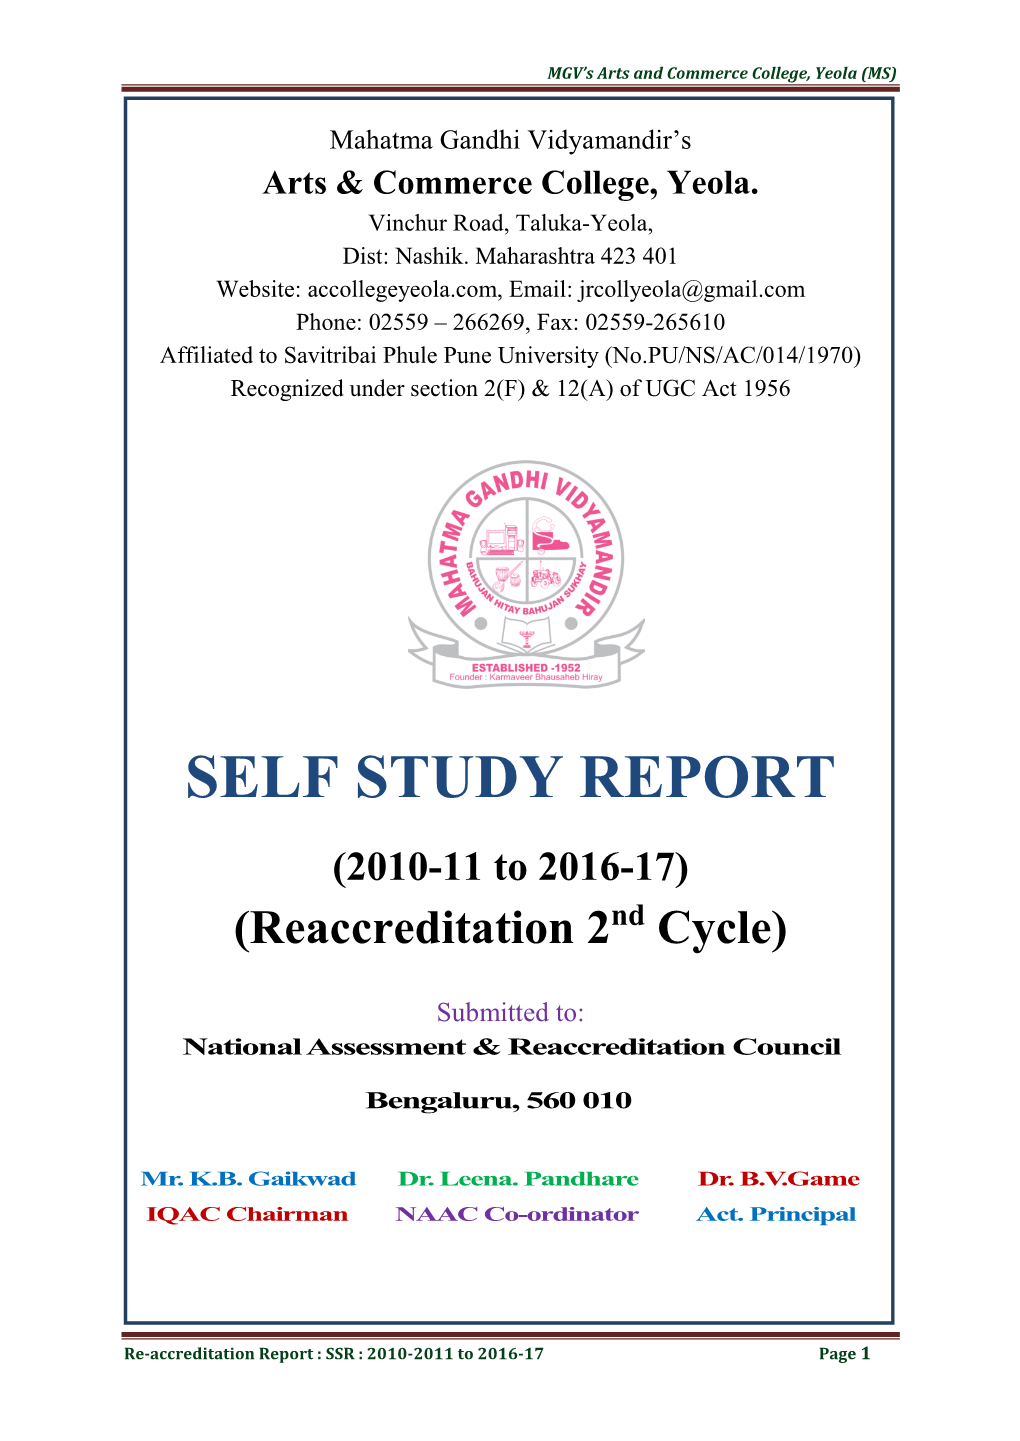 SELF STUDY REPORT (2010-11 to 2016-17) (Reaccreditation 2Nd Cycle)